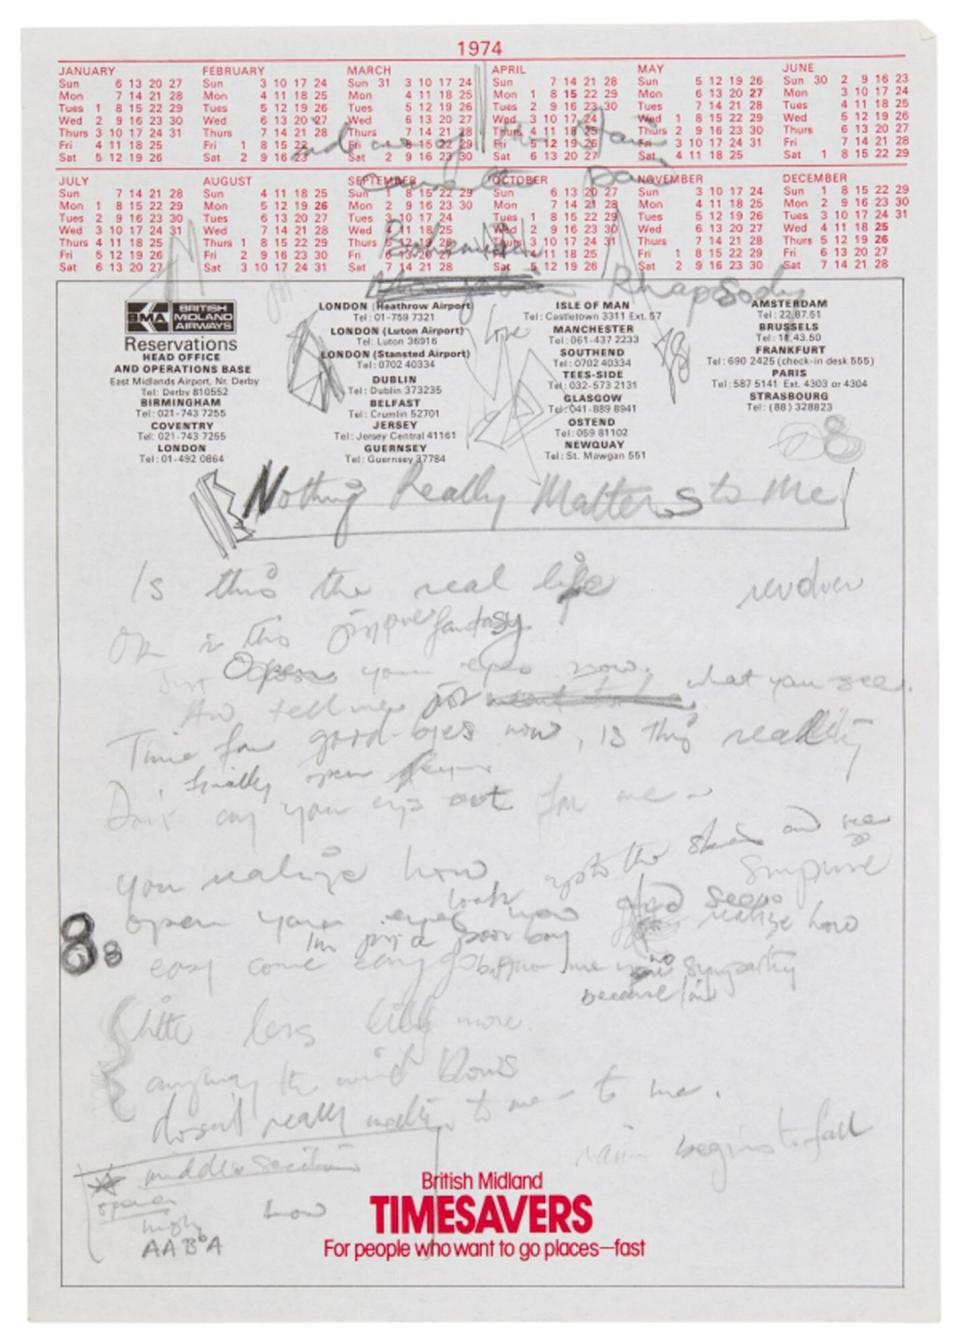 Freddie Mercury's handwritten lyrics for 'Bohemian Rhapsody,' which appear to show a different title